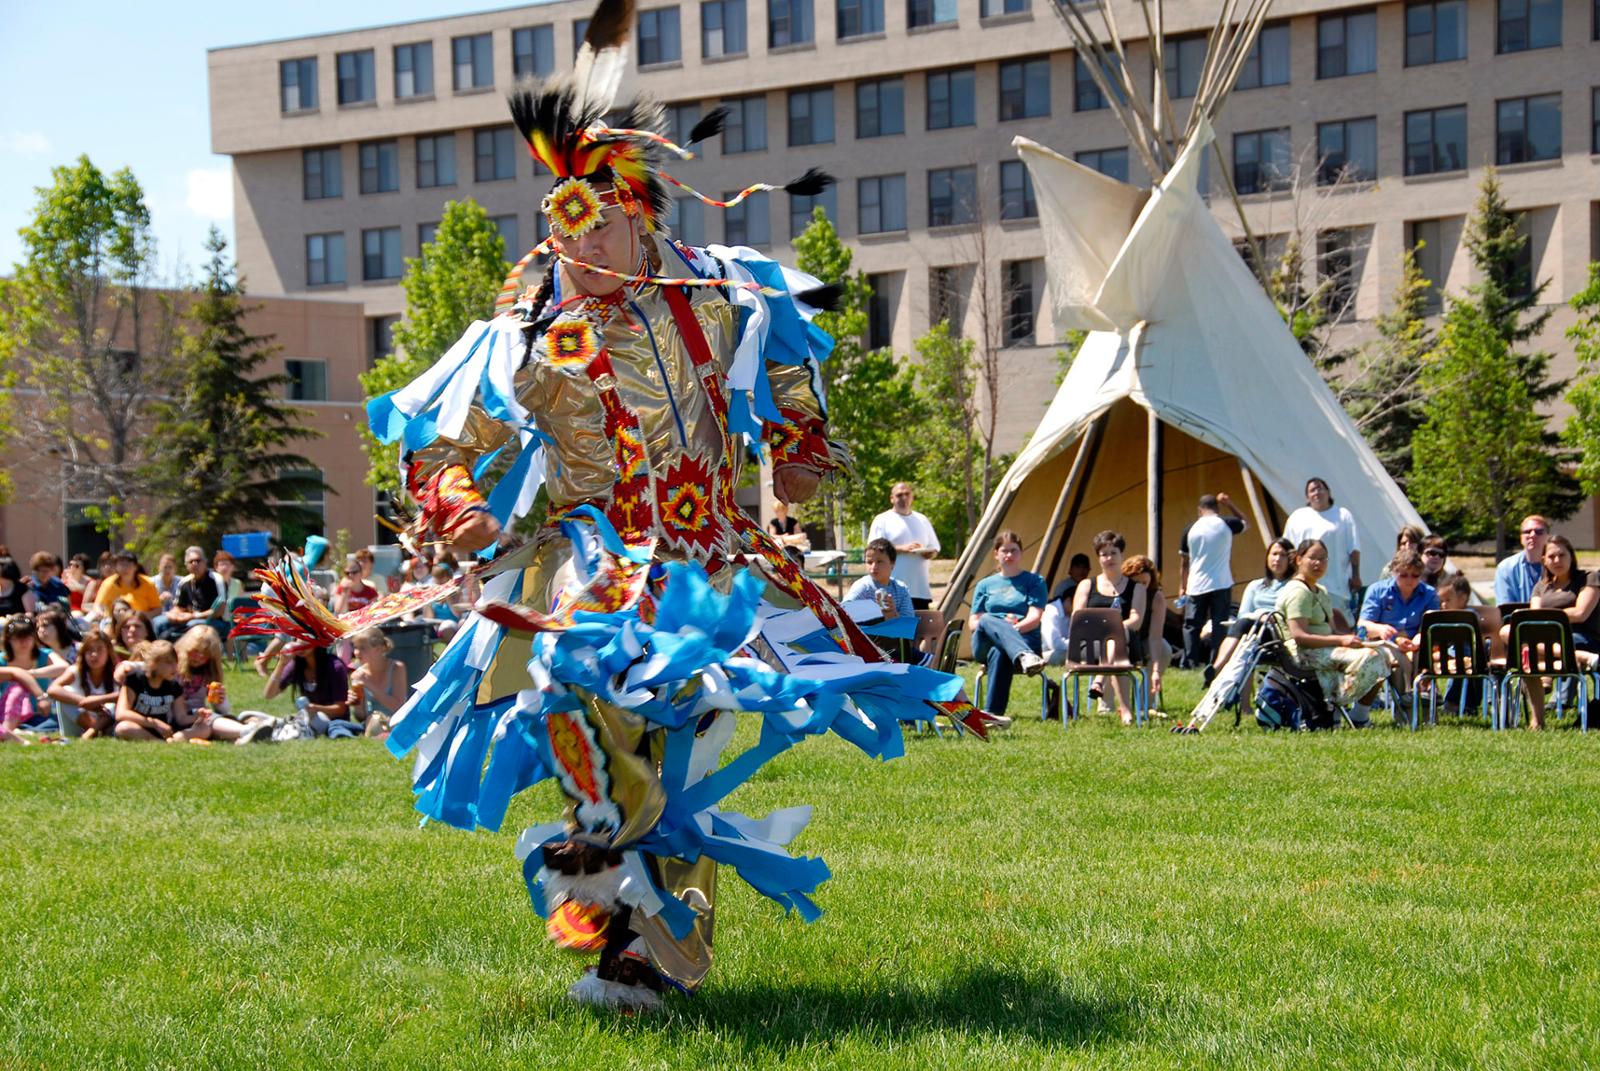 An Indigenous dancer dances with tradition attire.